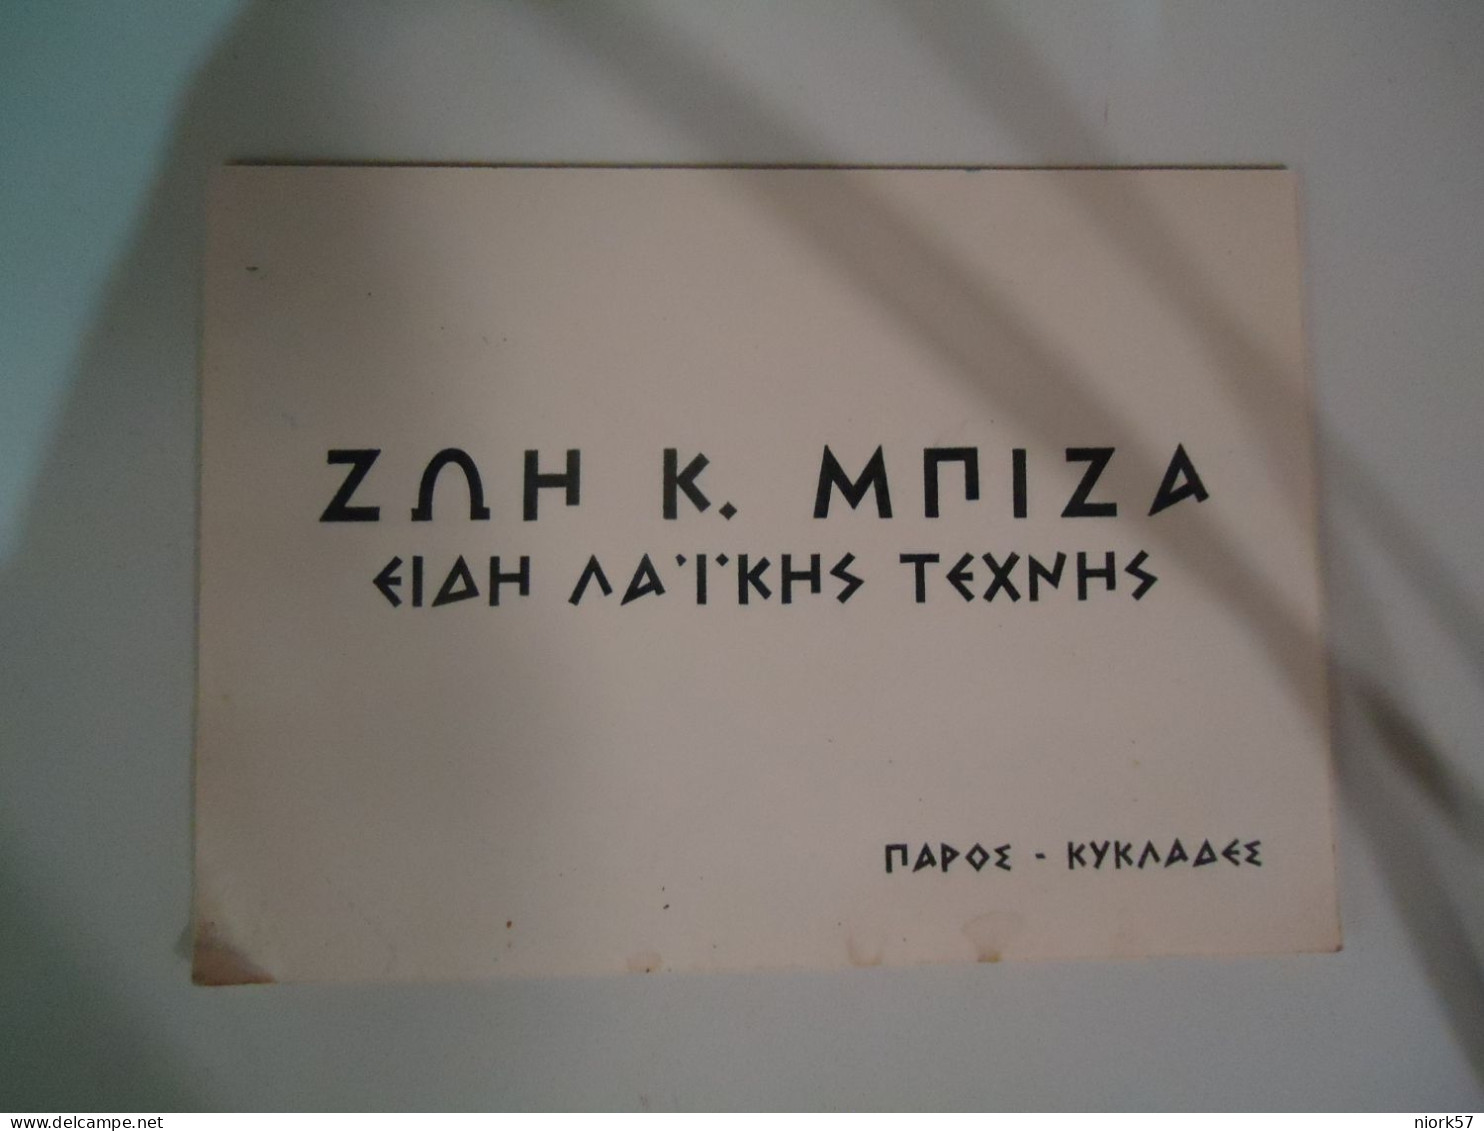 GREECE  POSTCARDS  ΦΩΤΟ   SMALL  ΔΙΑΦΗΣΤΙΚΗ  ΚΑΡΤΑ  ΠΑΡΟΣ      FOR MORE PURCHASES 10% DISCOUNT - Grèce